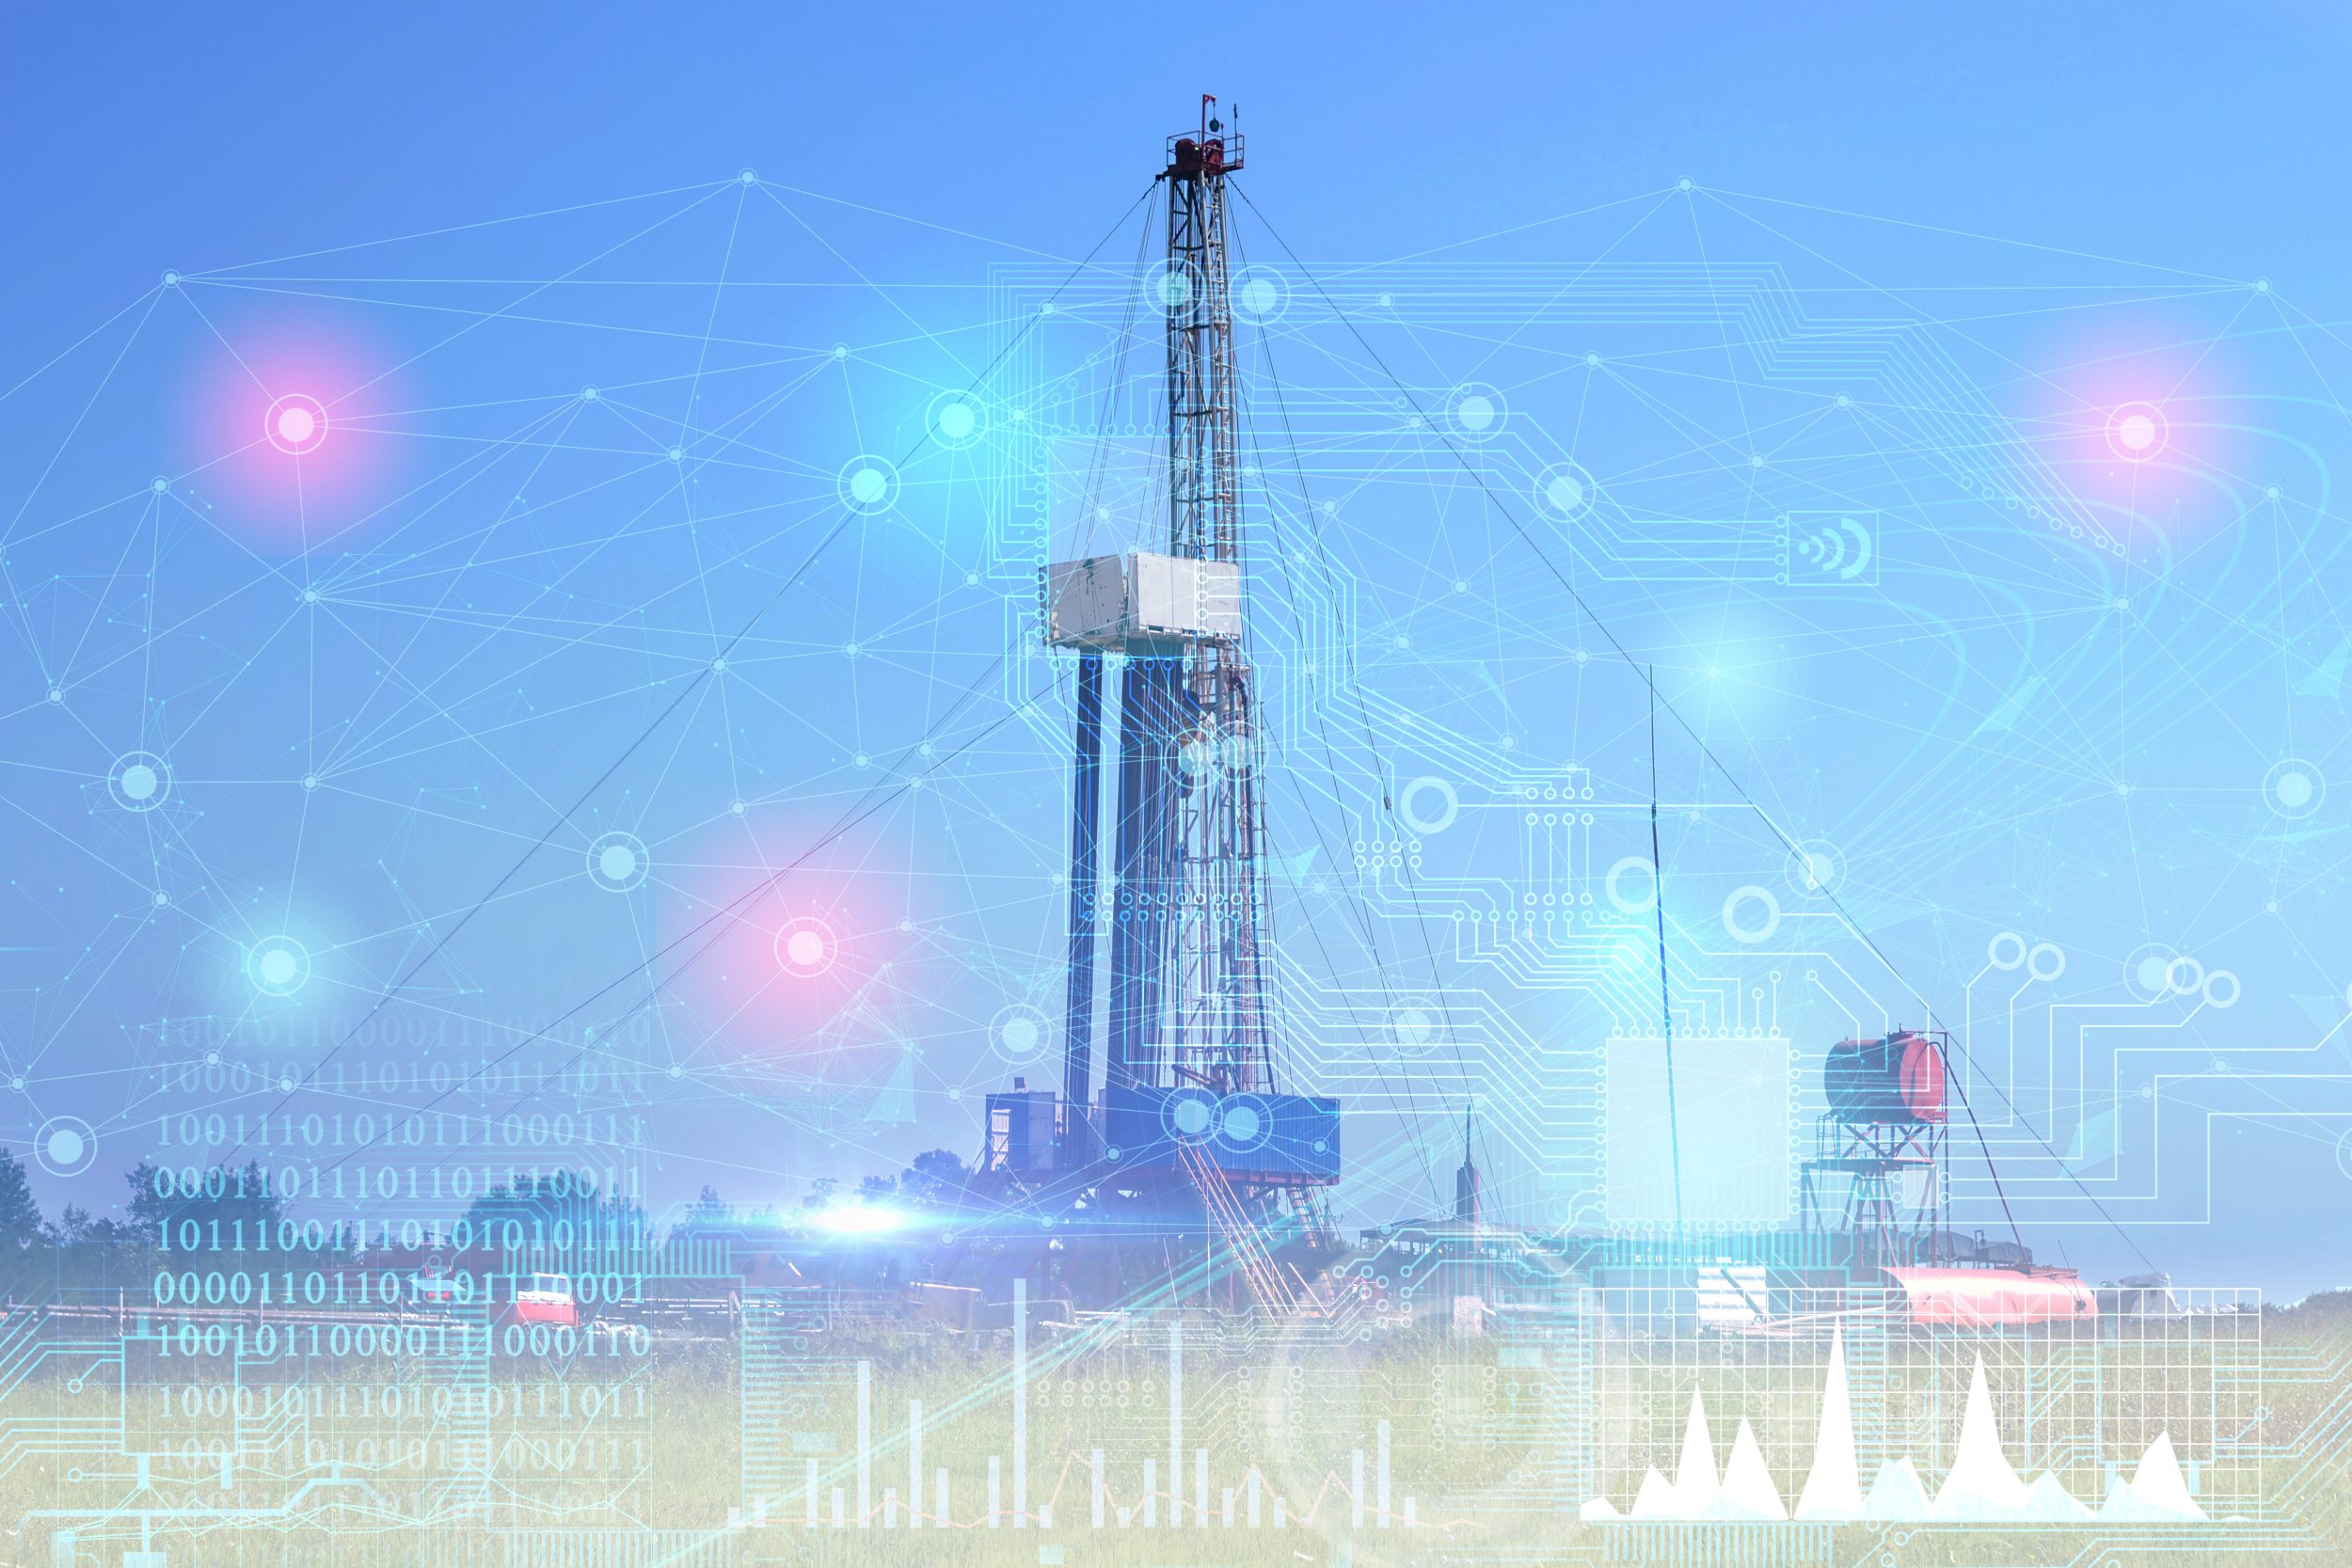 Description the concept of drilling geological exploration wells for oil. Collect and analyze the obtained data using artificial intelligence and reduce drilling costs